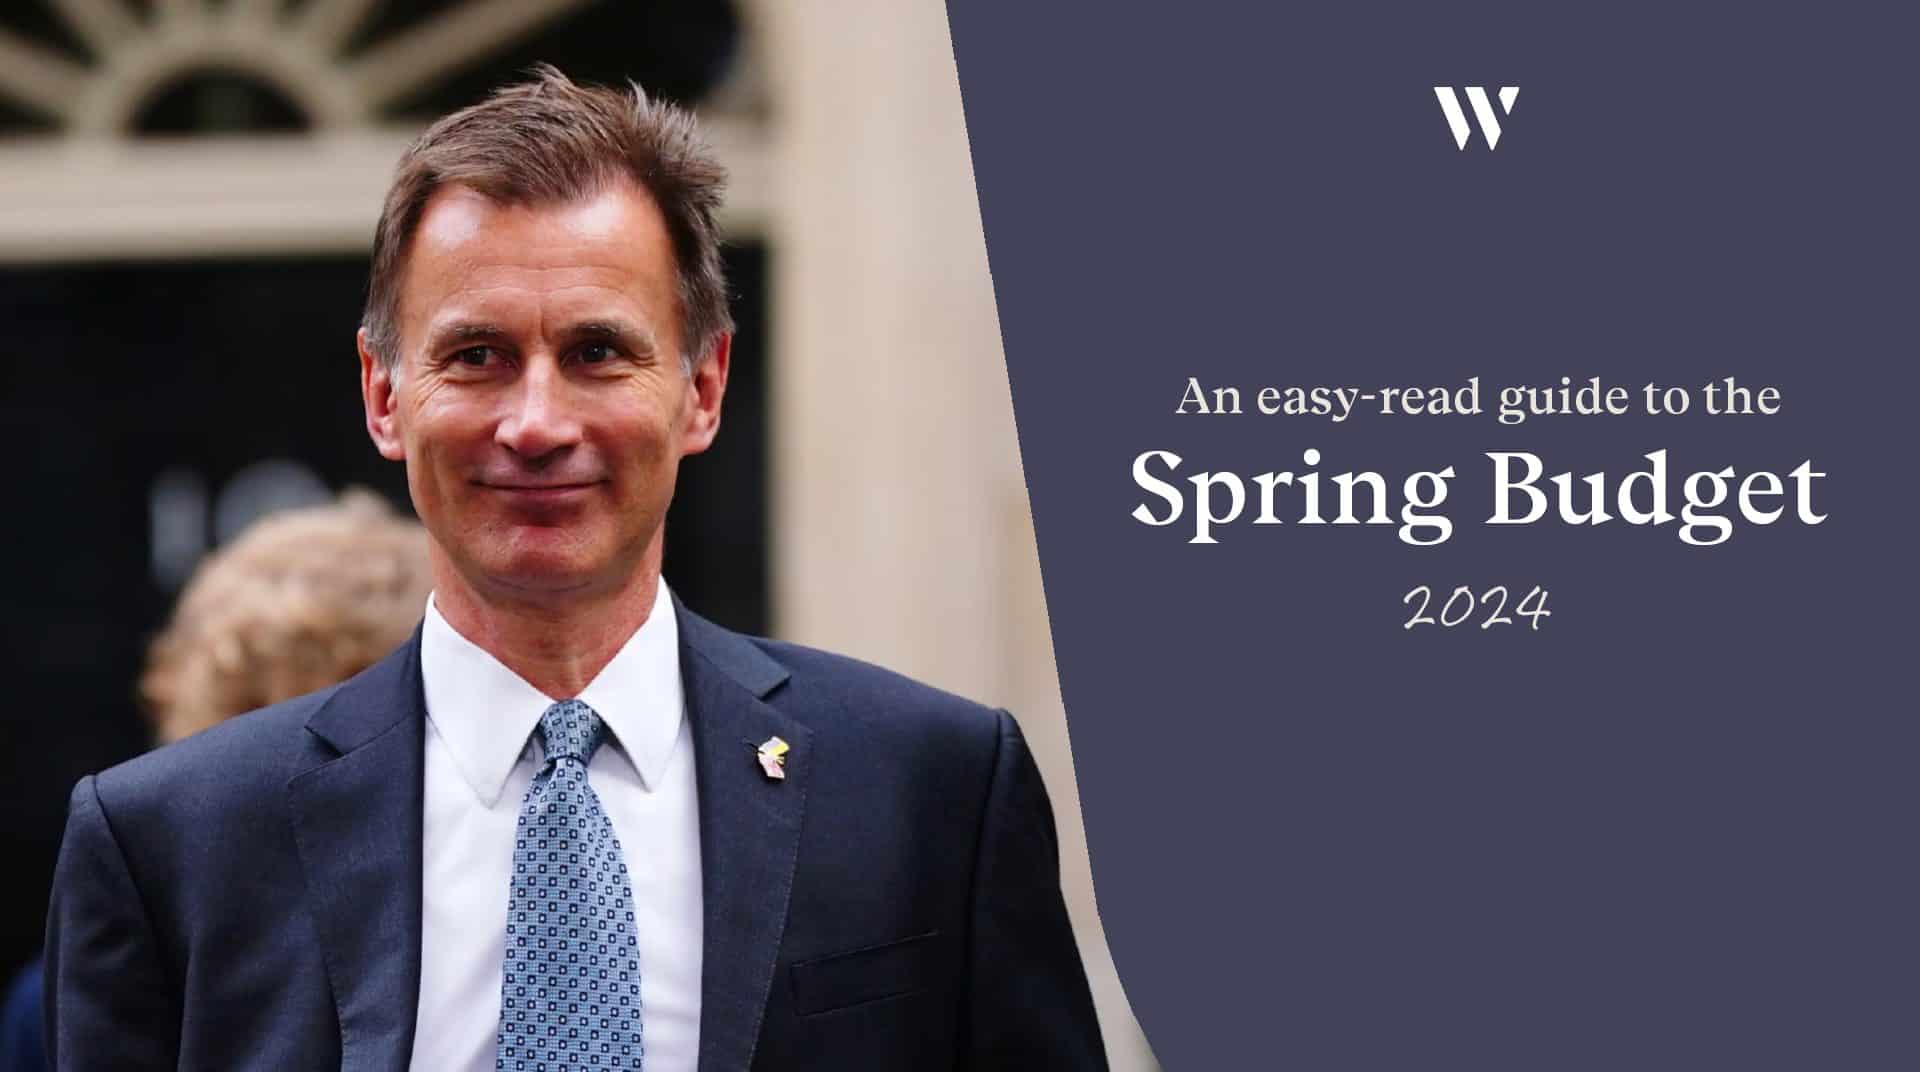 Spring Budget 2024 from the Chancellor of the Exchequer | An easy-read guide from Whyfield Accountants in Cornwall